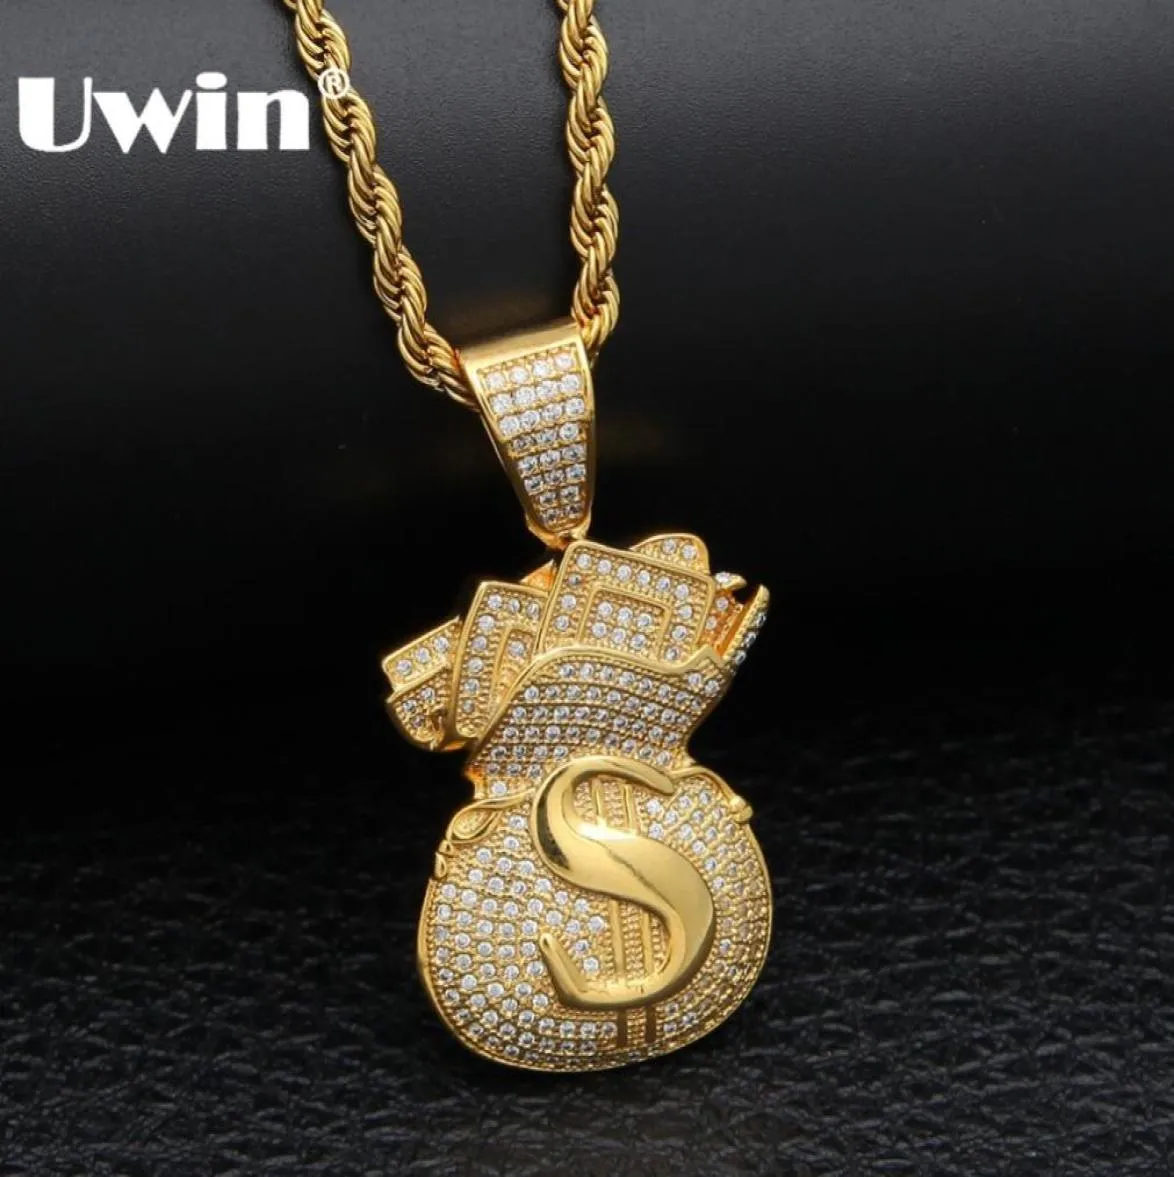 Uwin US Money Bag Necklace Pendant Full Bling Cubic Zirconia Iced Out Gold Chains Silver Gold Color Hiphop Jewelry For Men1393144